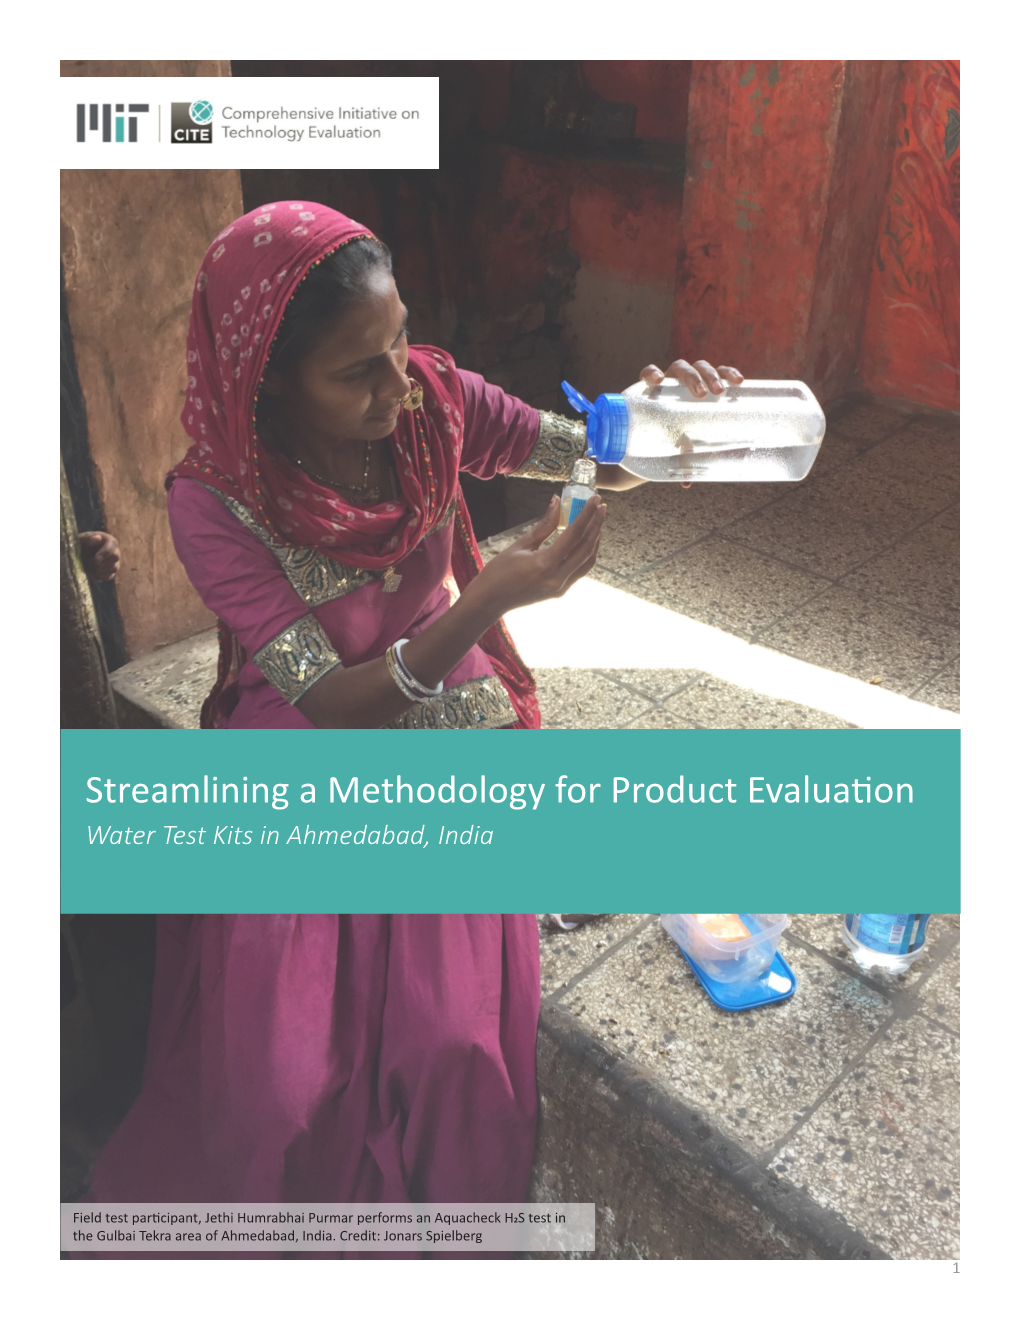 Streamlining a Methodology for Product Evaluation Water Test Kits in Ahmedabad, India